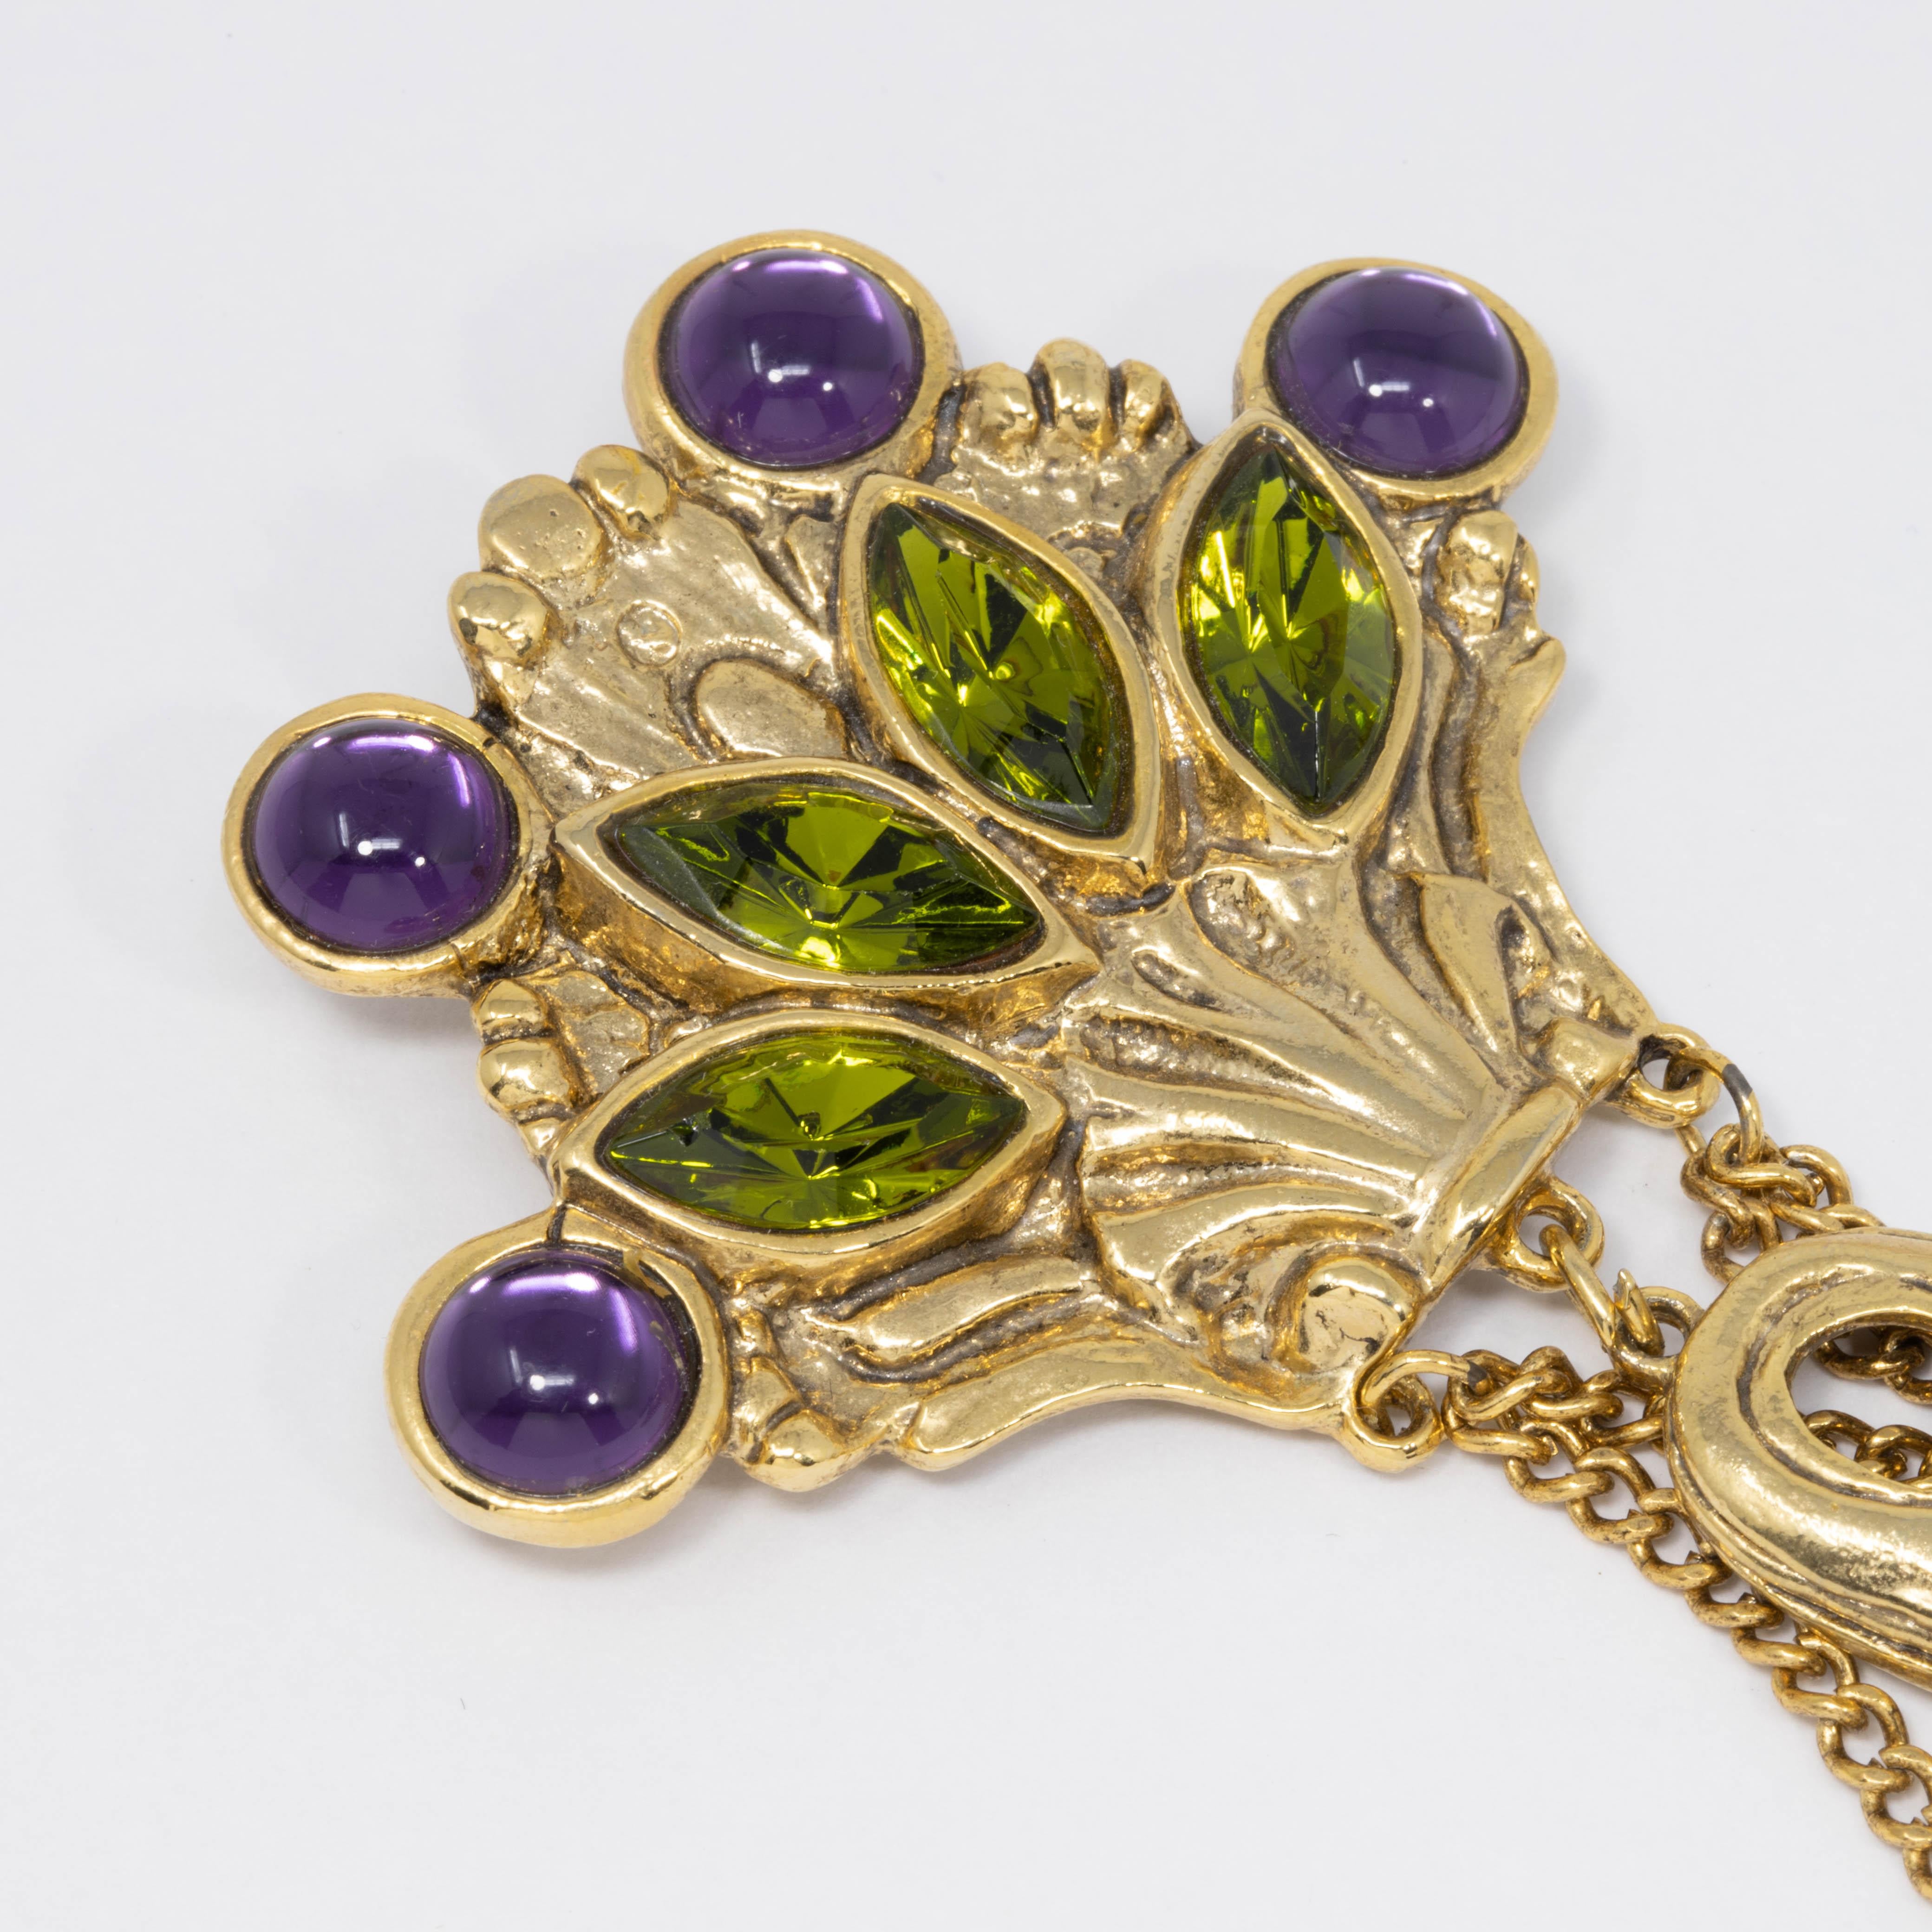 A dangling pin brooch by Craft. Influenced by Victorian and Art Nouveau style, this stylish accessory features a extravagant design with violet cabochons and green crystals, accented with a dangling chain and motif.

Signed CRAFT